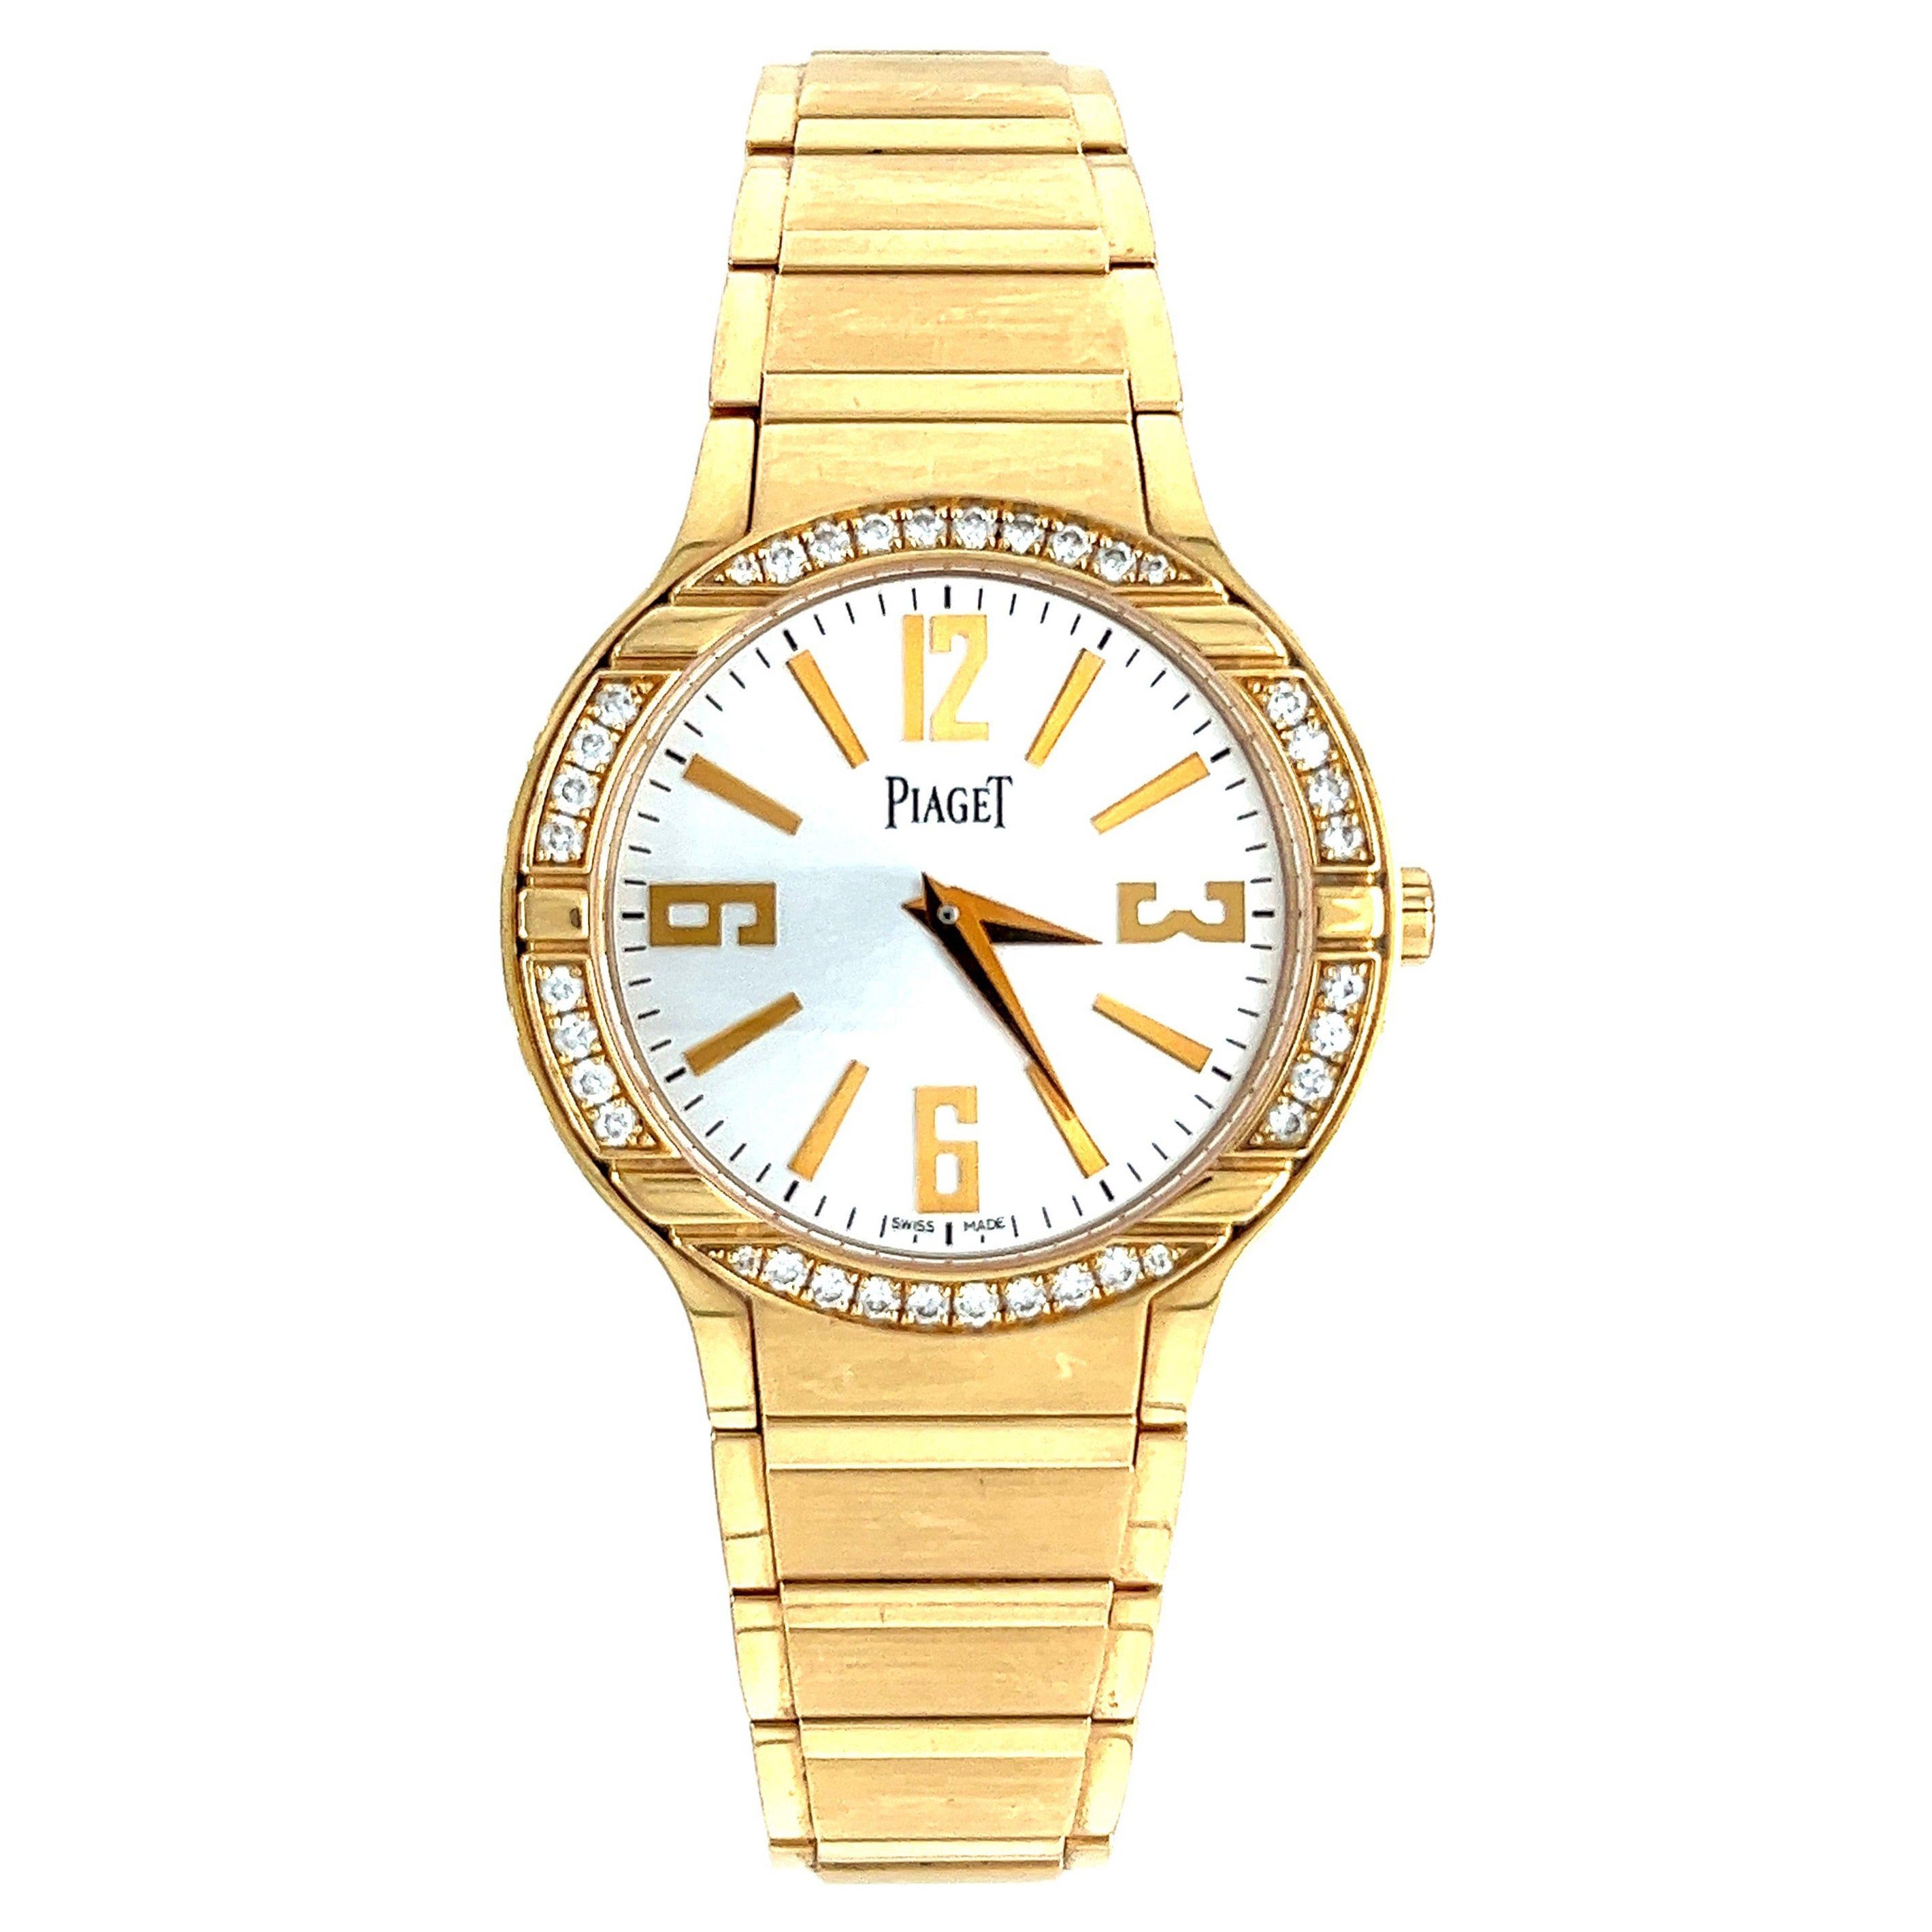 Piaget 'Polo' Ladies in 18k Yellow Gold with Diamond Bezel & Piaget Papers